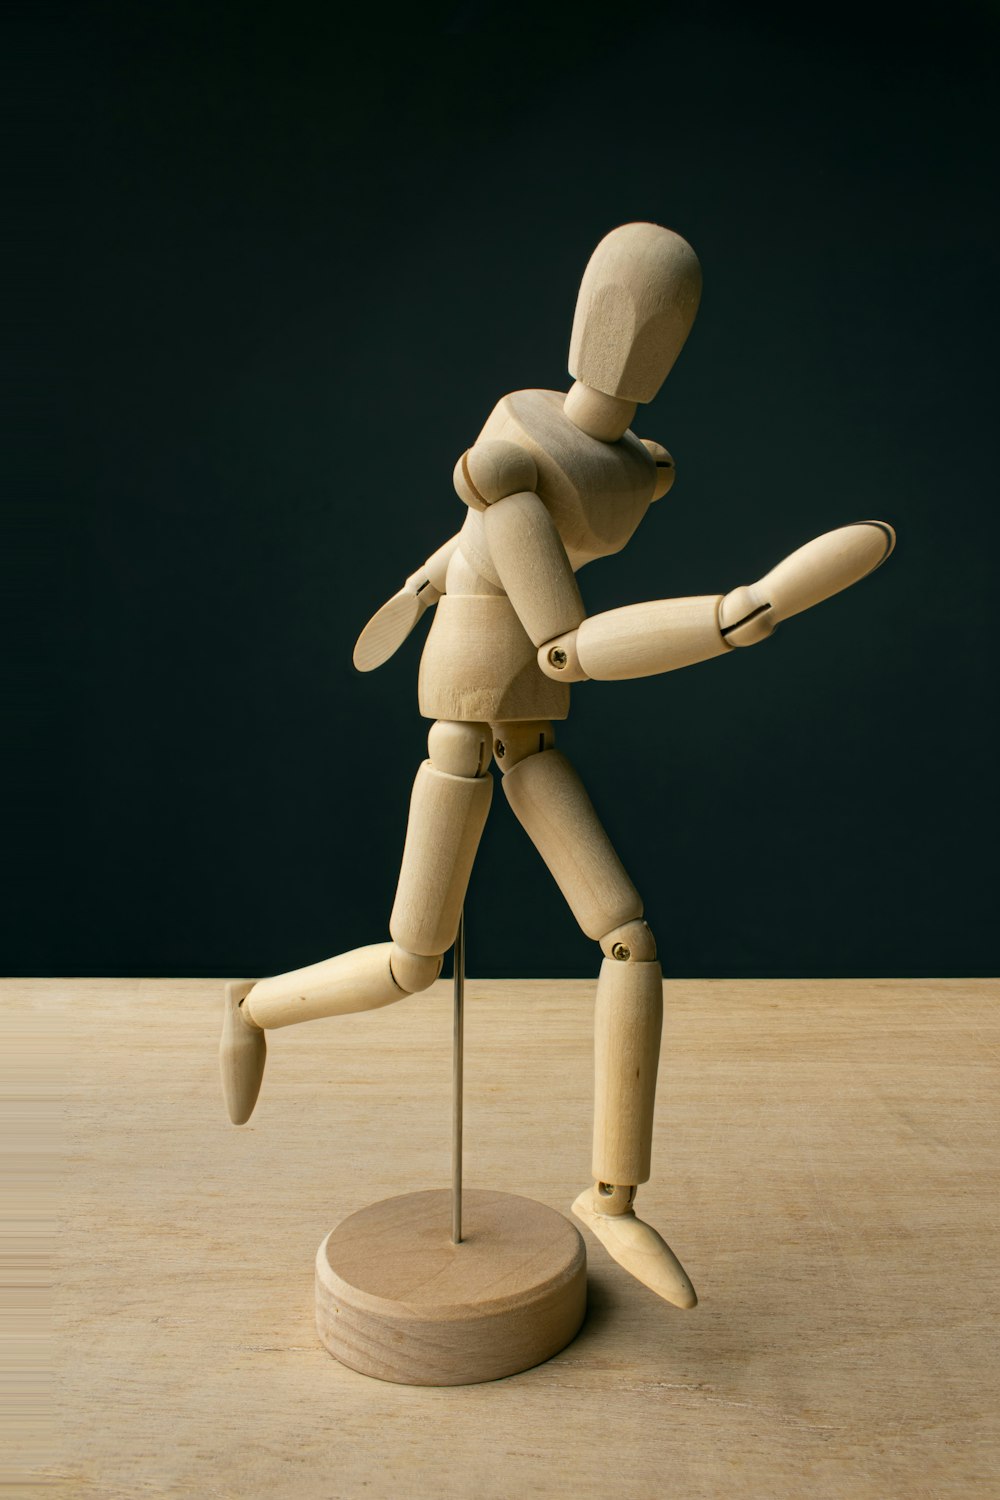 a wooden mannequin standing on a wooden base